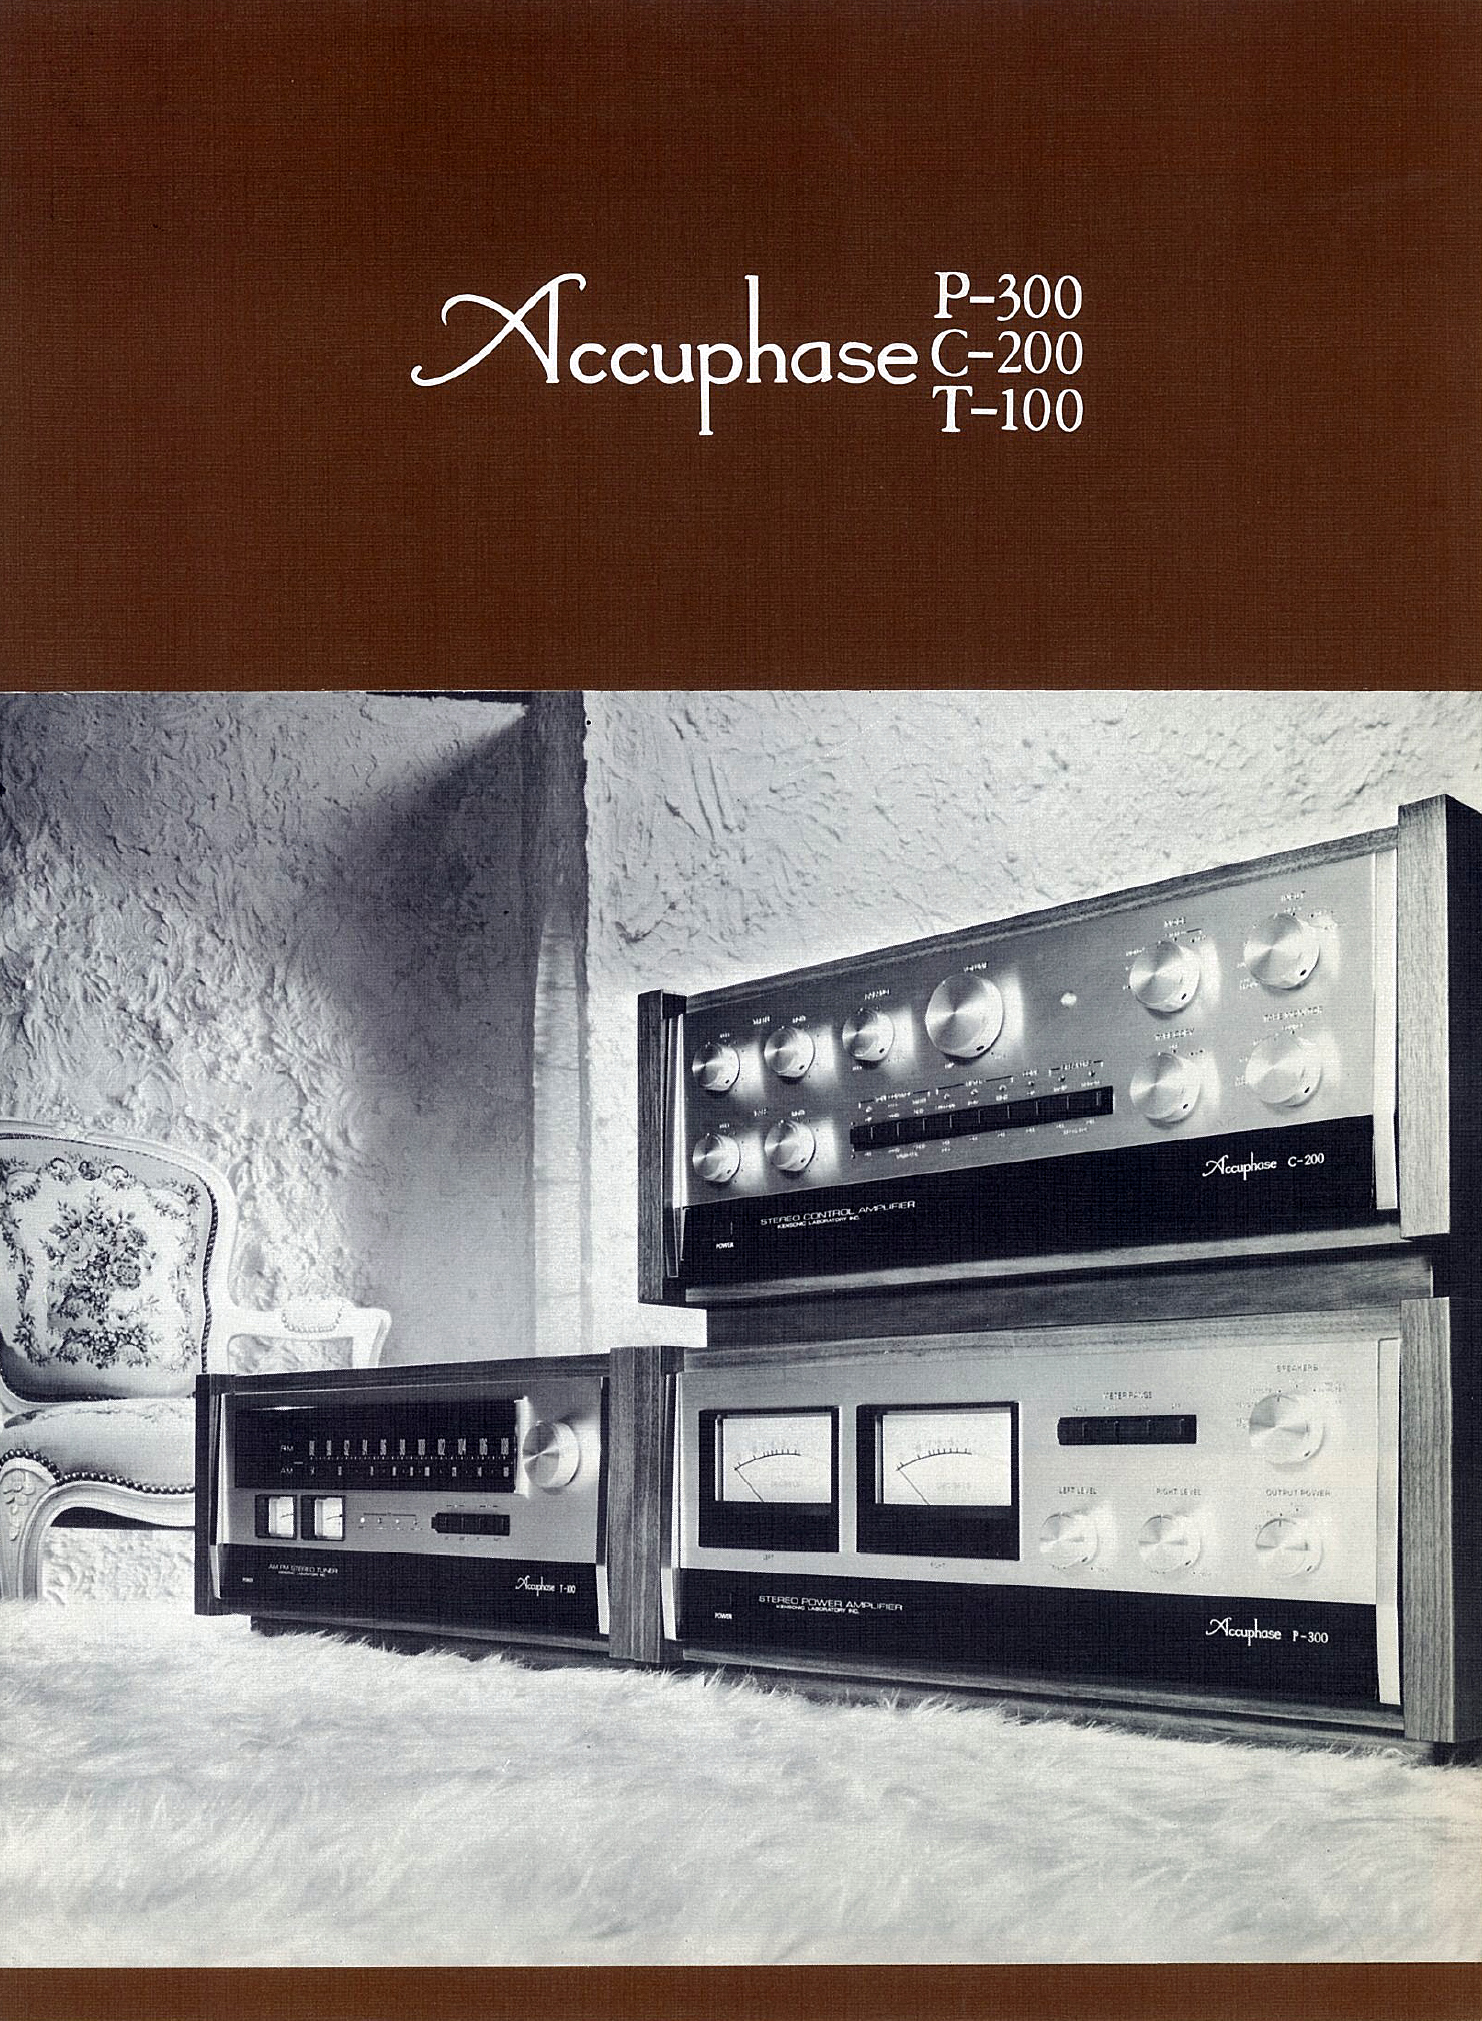 Accuphase C-200-P-300-T-100-1.jpg